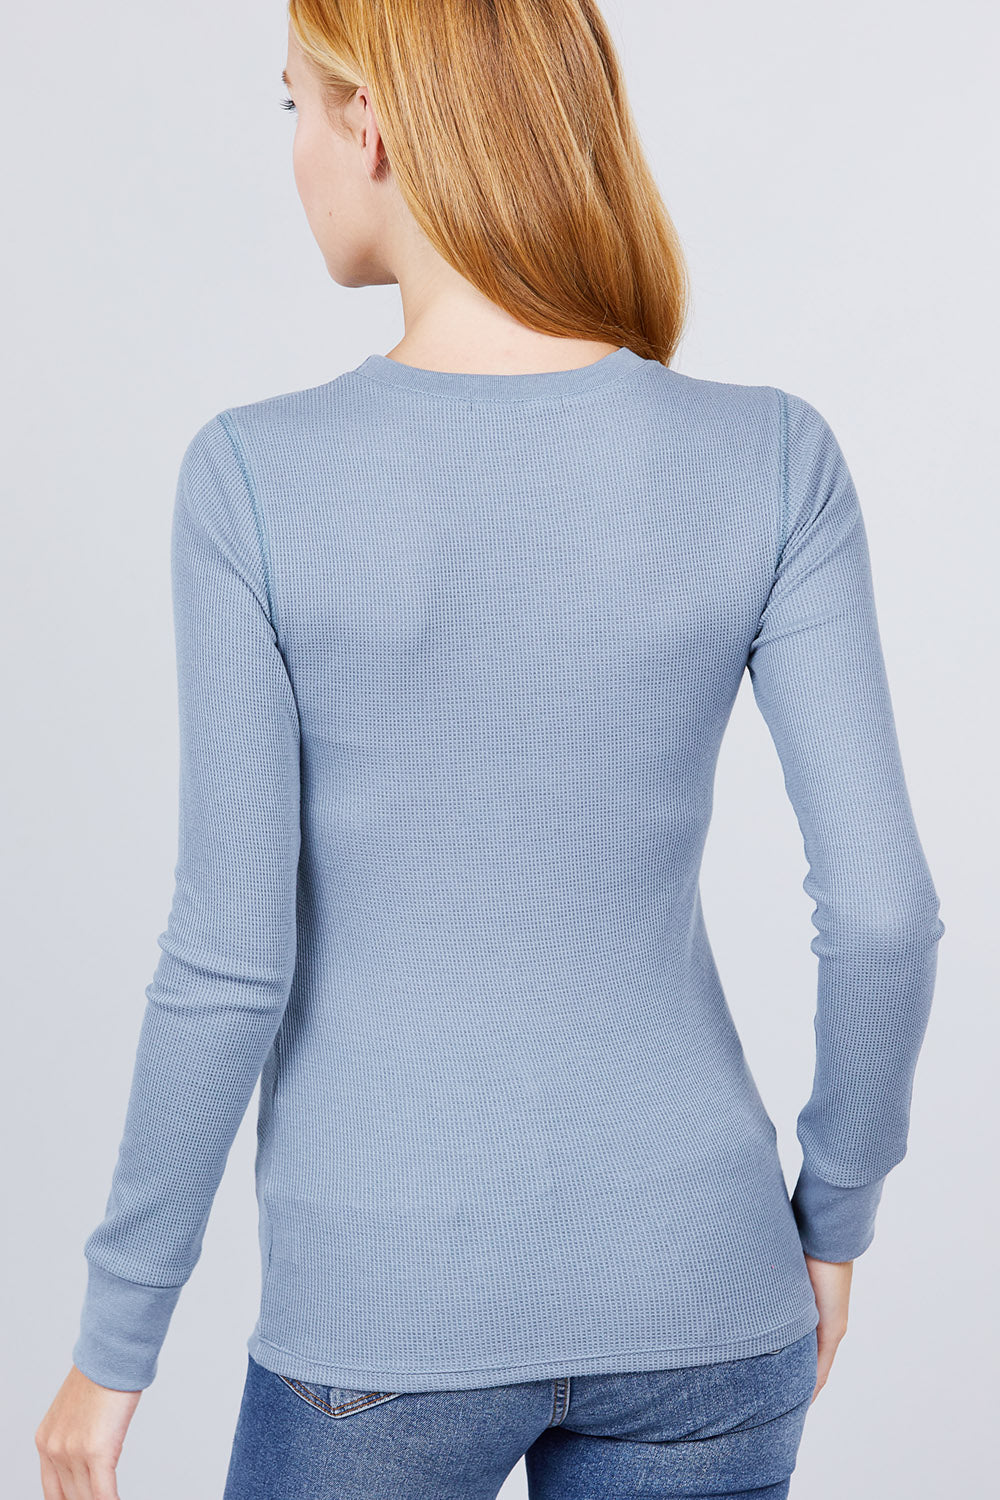 Long Sleeve Crew Neck Thermal Knit Top